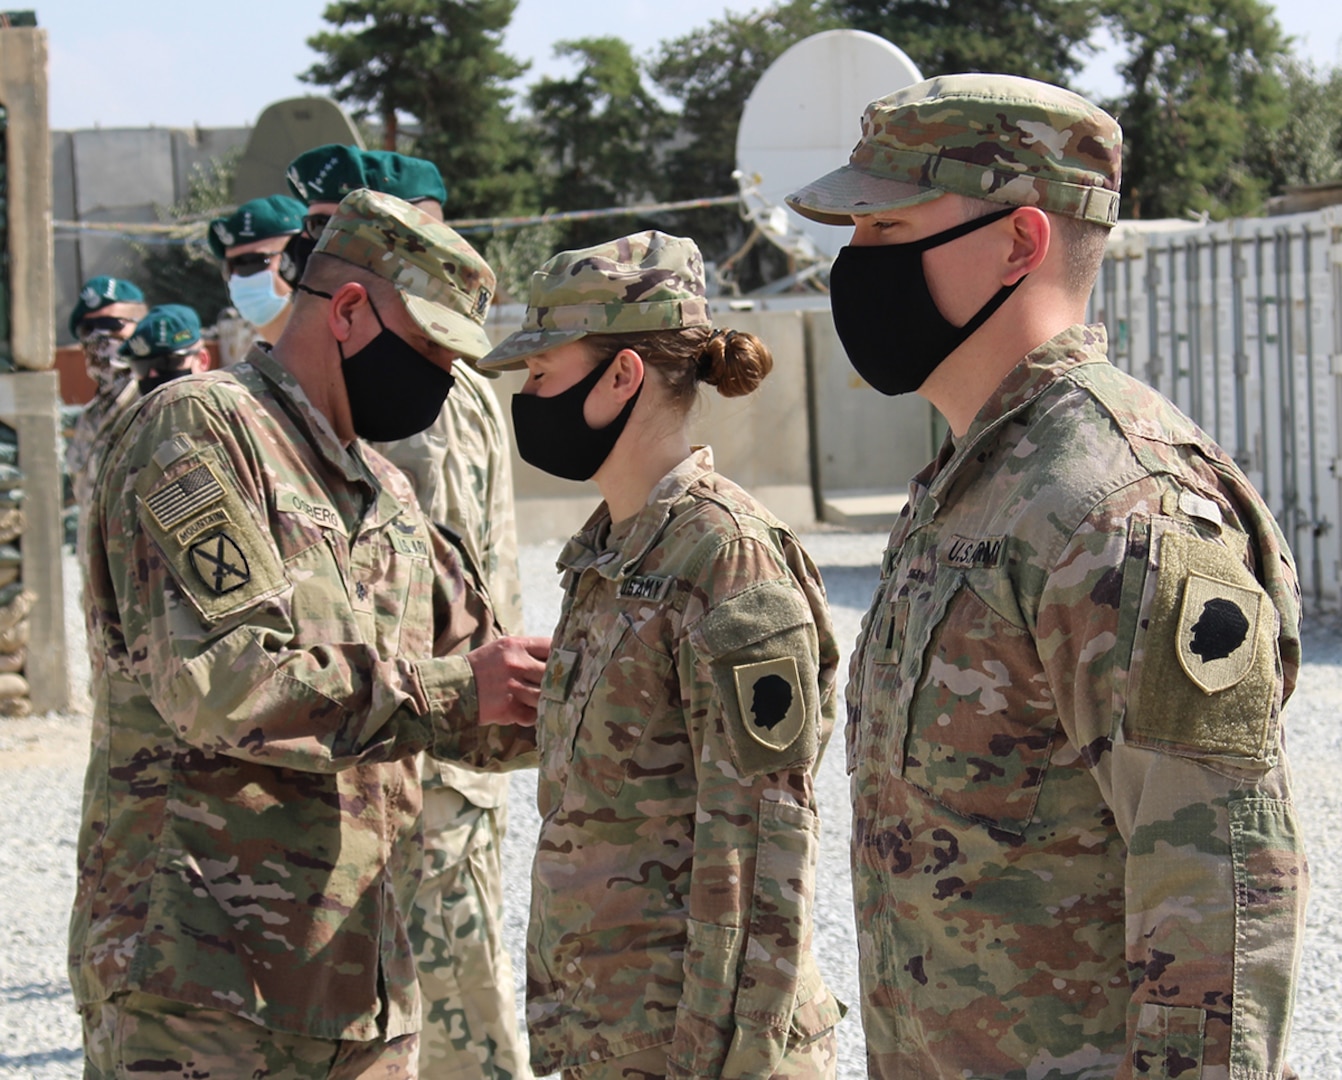 Lt. Col. Jason Osberg, of Champaign, Illinois, Commander, Bilateral Embedded Staff Team A25, presents Maj. Lorrie Novak, of Frankfort, Illinois, with her combat patch during the recent ceremony.